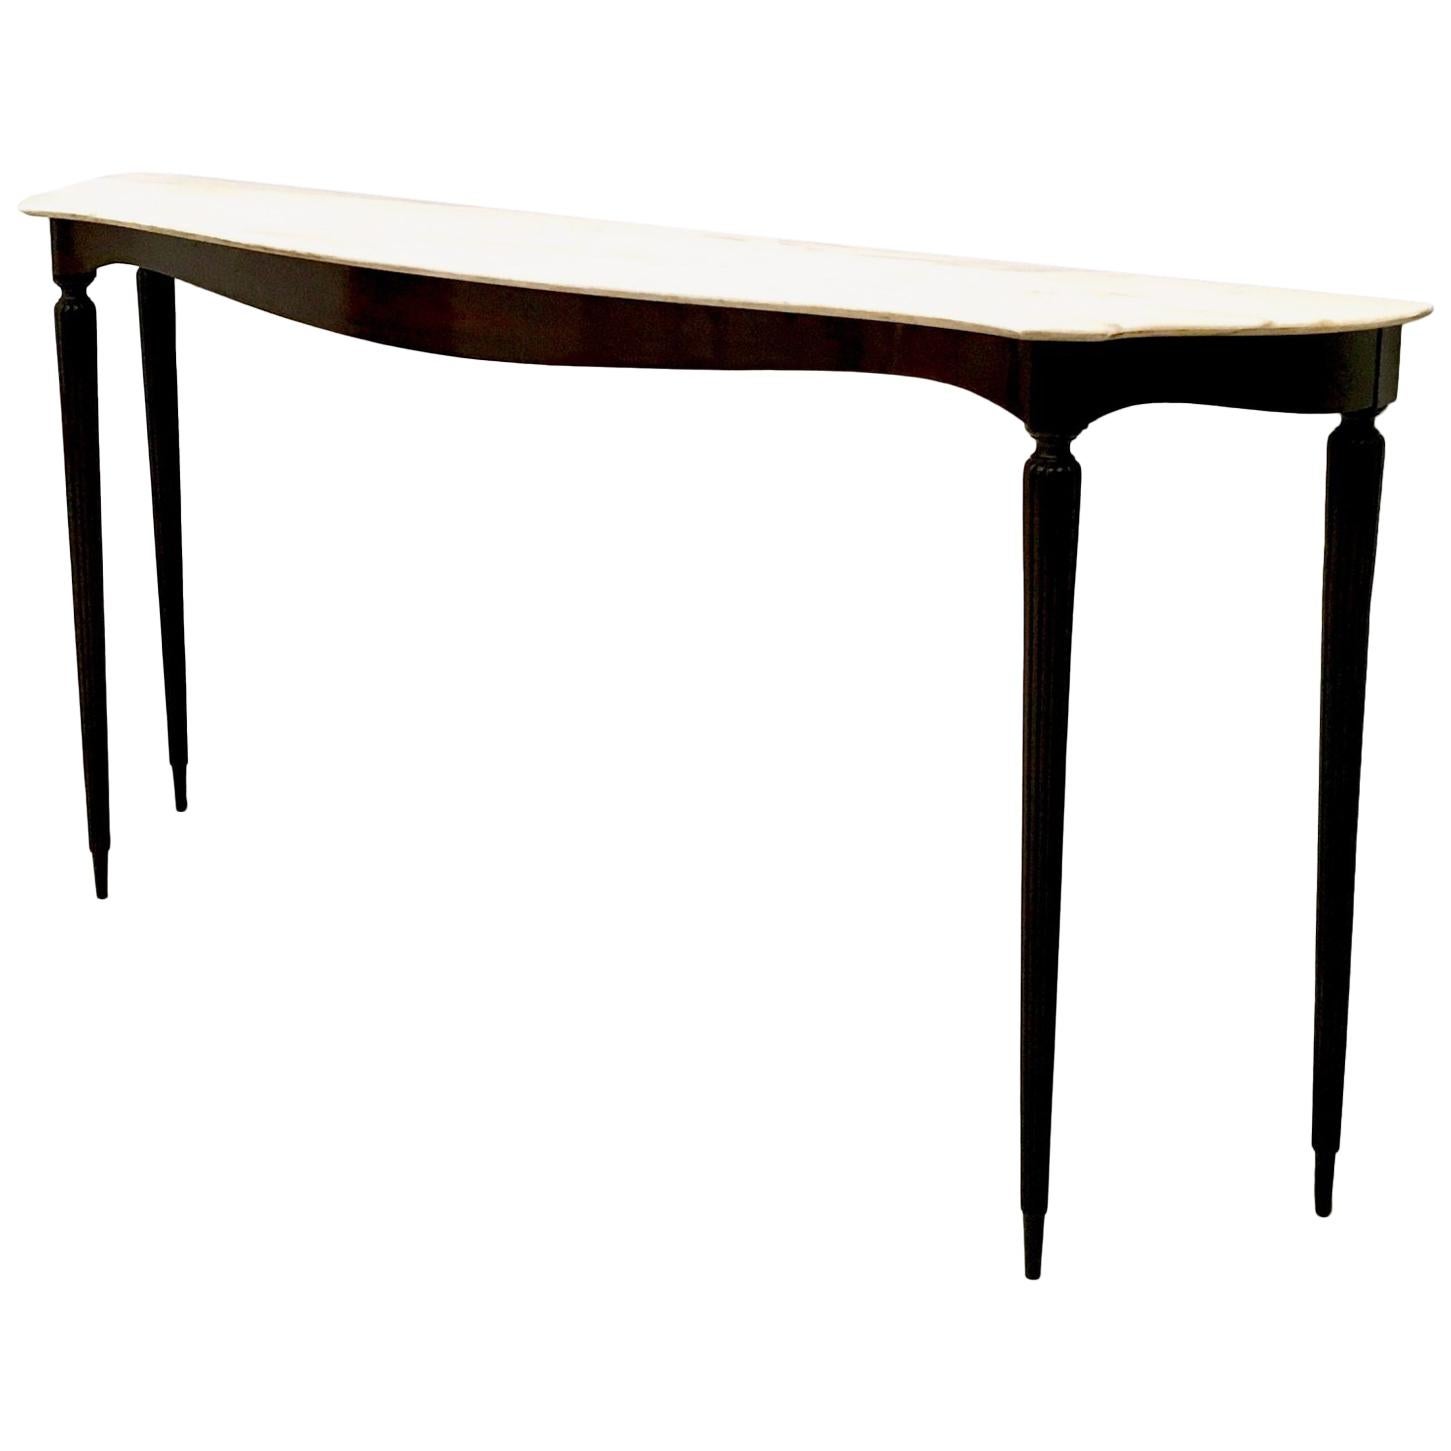 Ebonized Wood Console Table with a Portuguese Pink Marble Top, Italy, 1950s